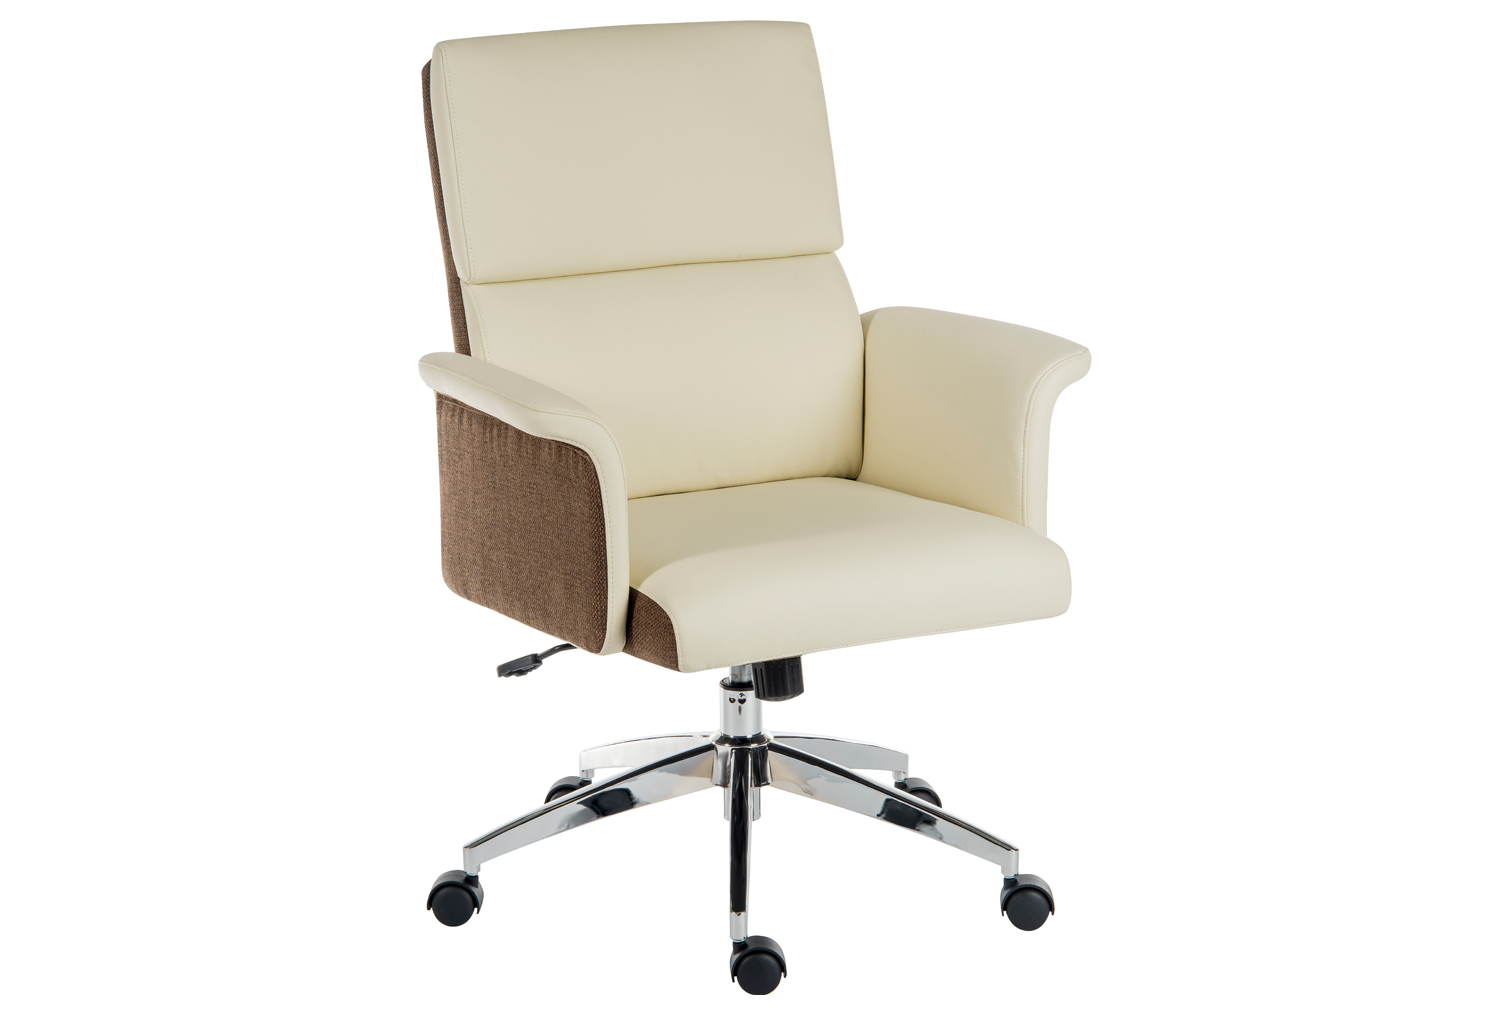 Panache Medium Back Executive Leather Look Office Chair Cream, Fully Installed